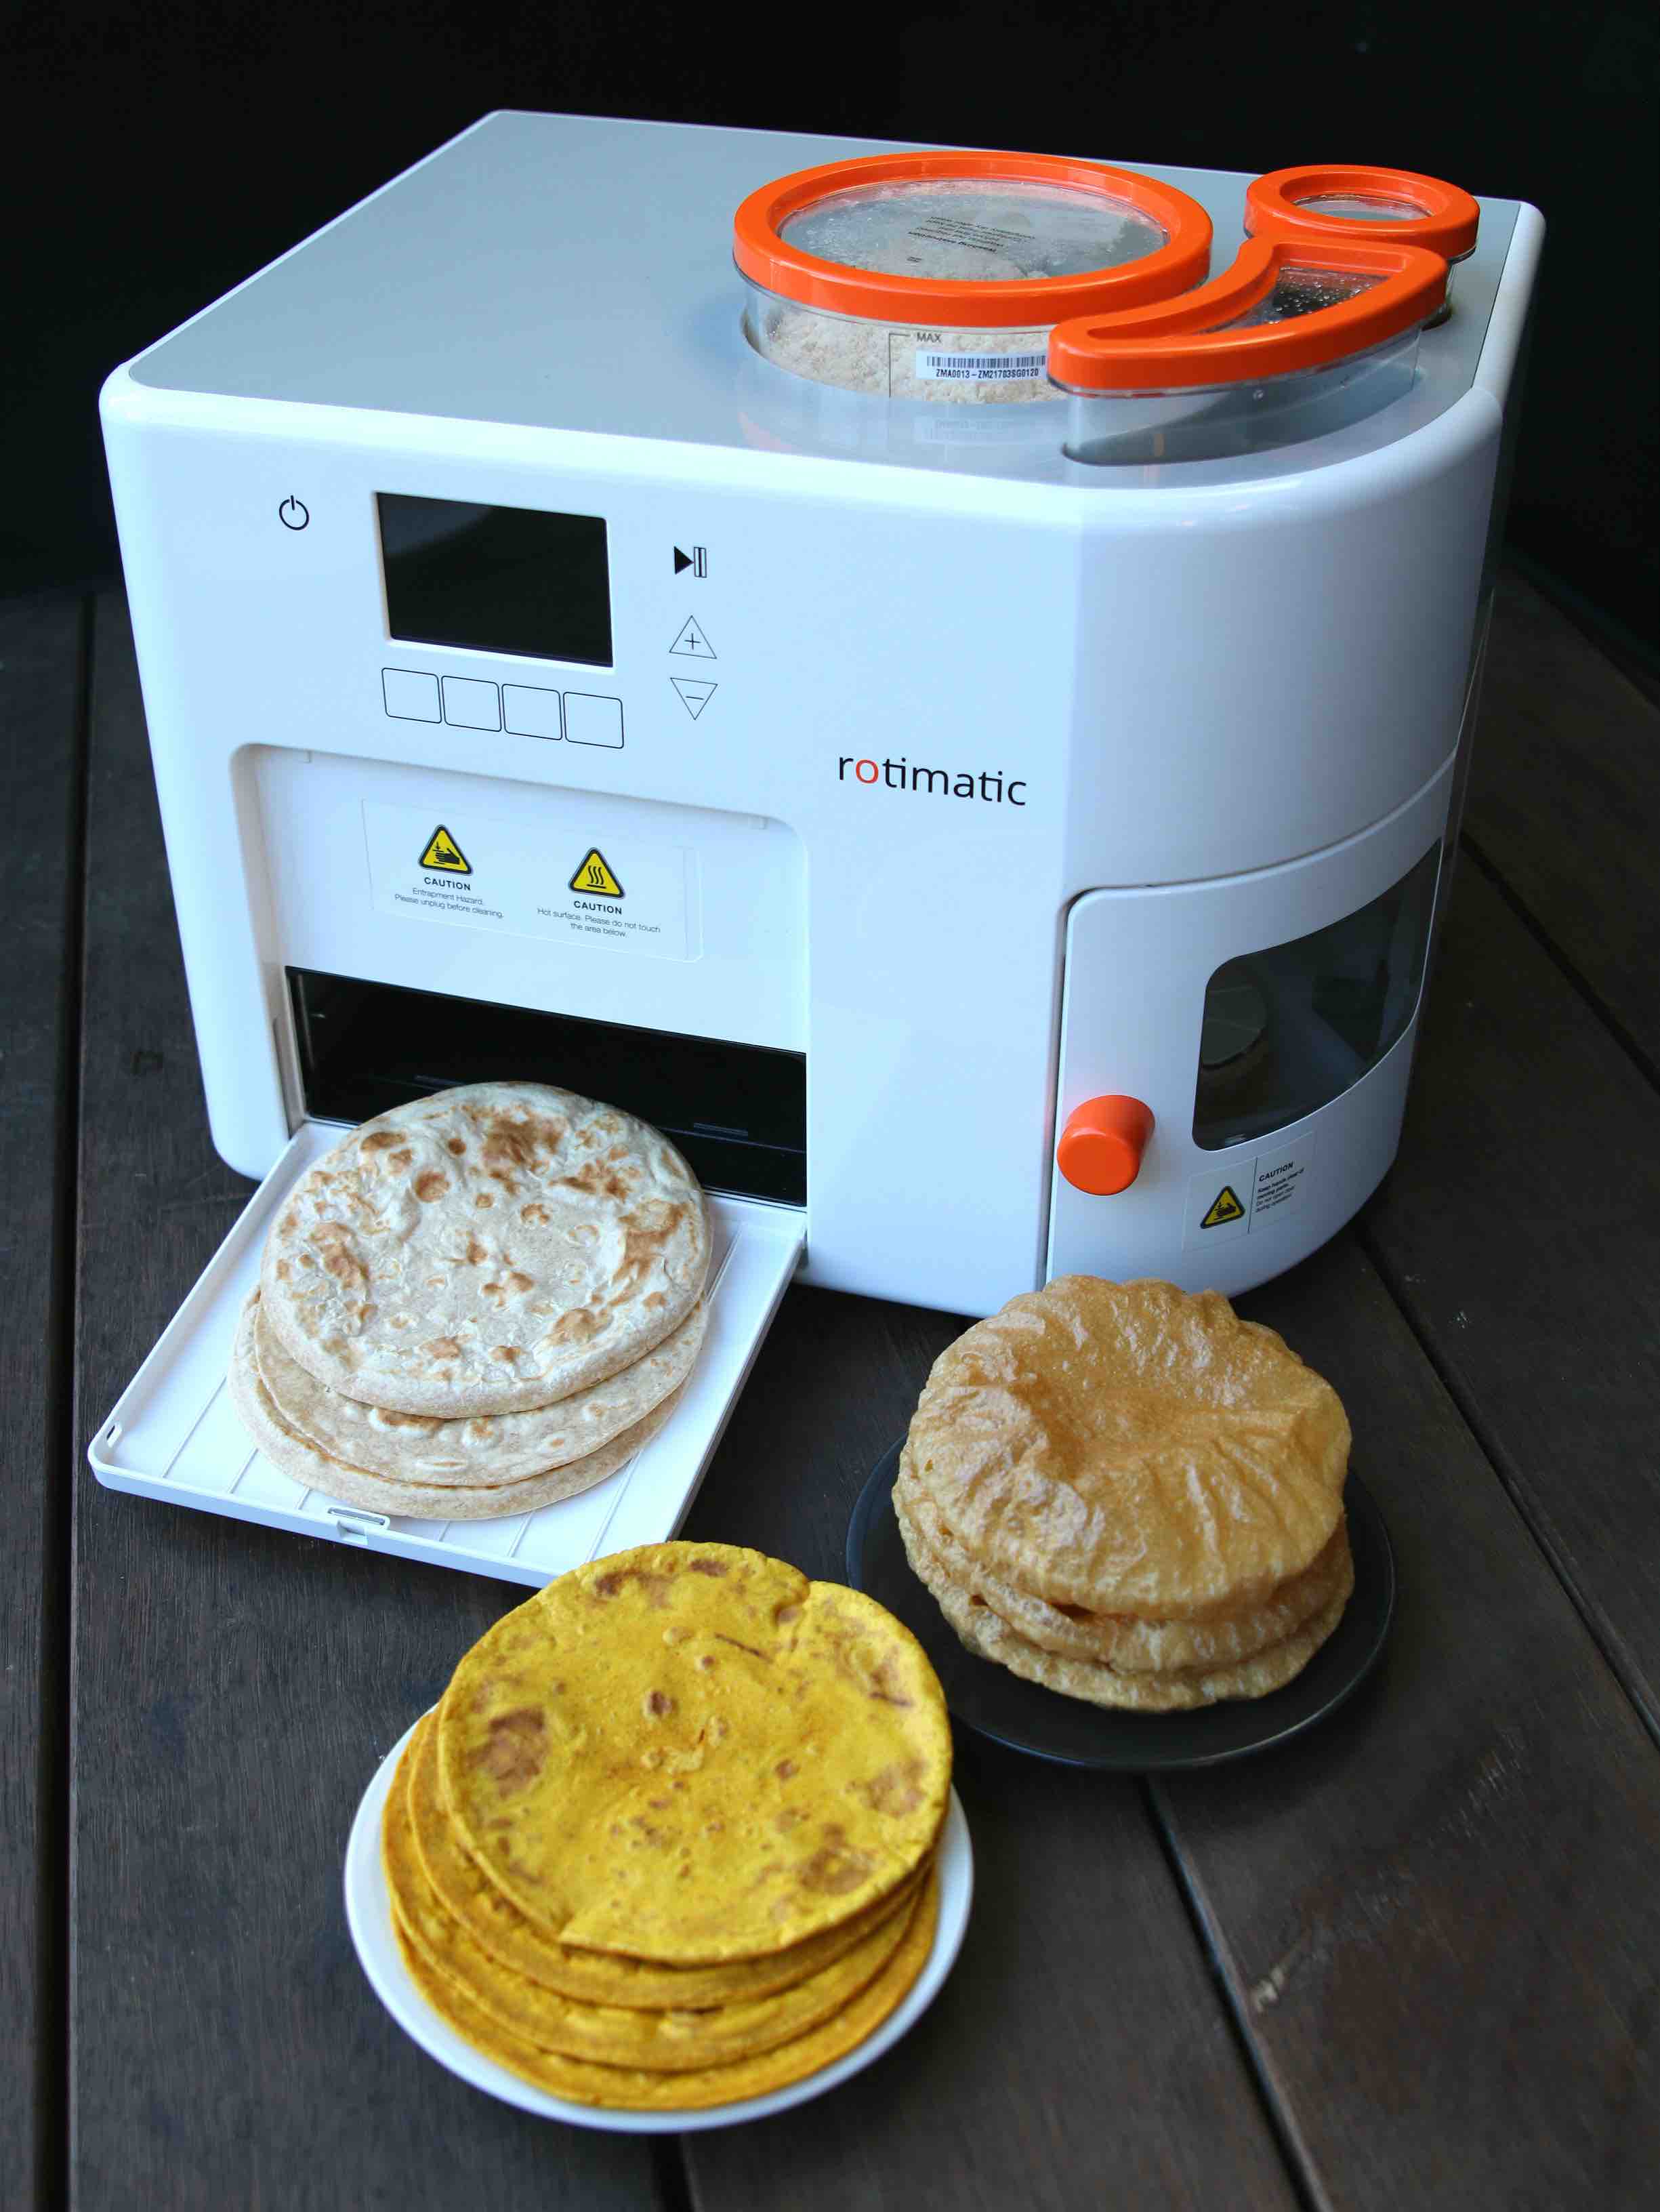 rotimatic review - automatic roti maker machine review ...